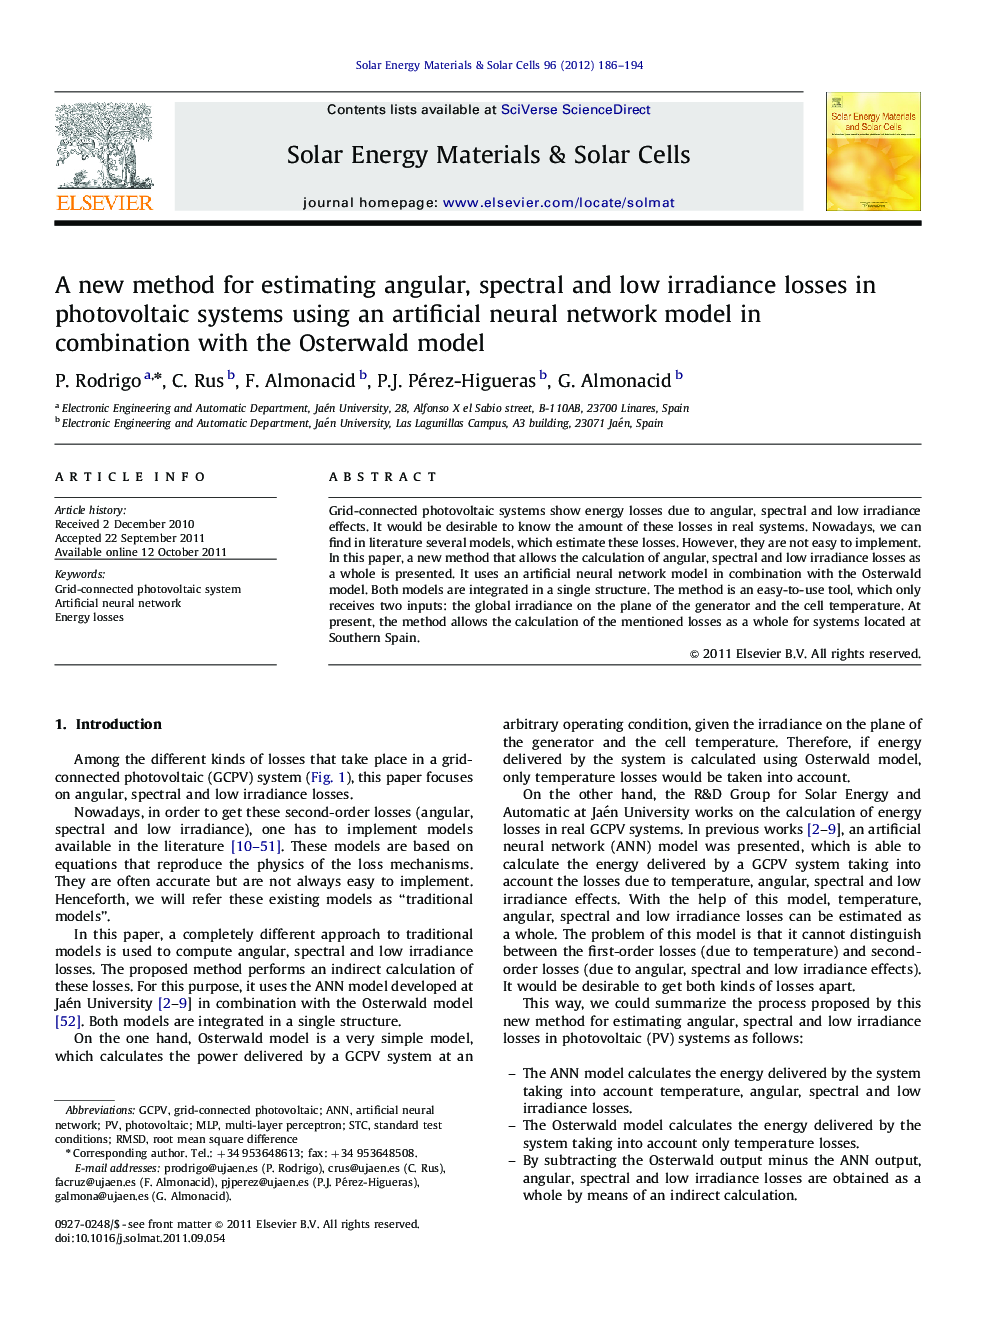 A new method for estimating angular, spectral and low irradiance losses in photovoltaic systems using an artificial neural network model in combination with the Osterwald model